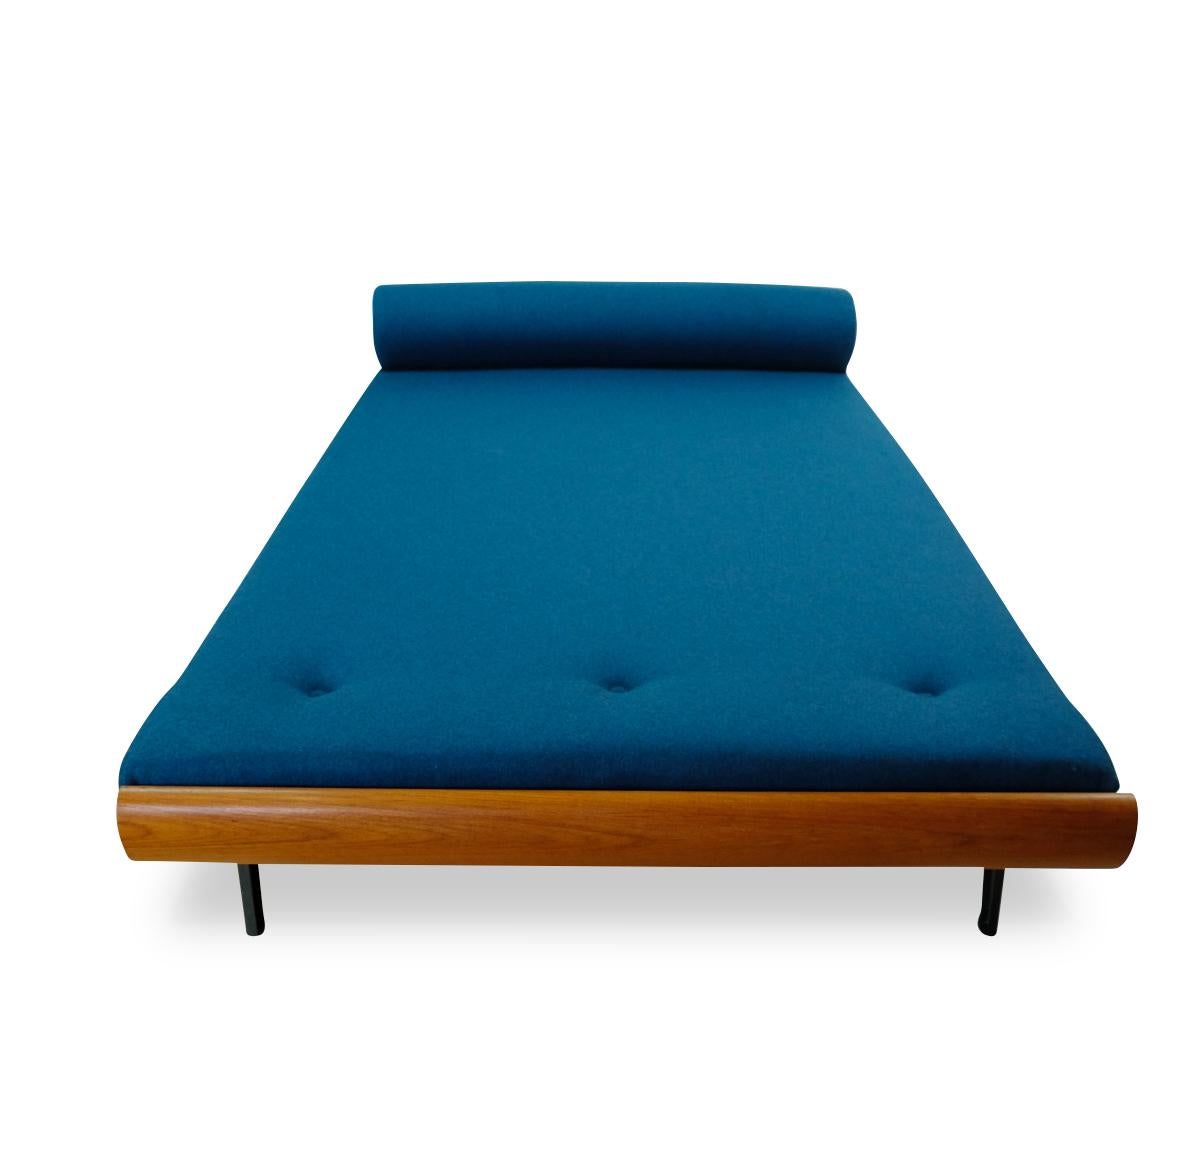 Vintage industrial modernist daybed designed by Dick Cordemijer for the Dutch Auping during the 1950s.

New high-quality woolen upholstery and foam; the daybed can be used as both a sofa and spare bed. The cover features a zipper on both pillow